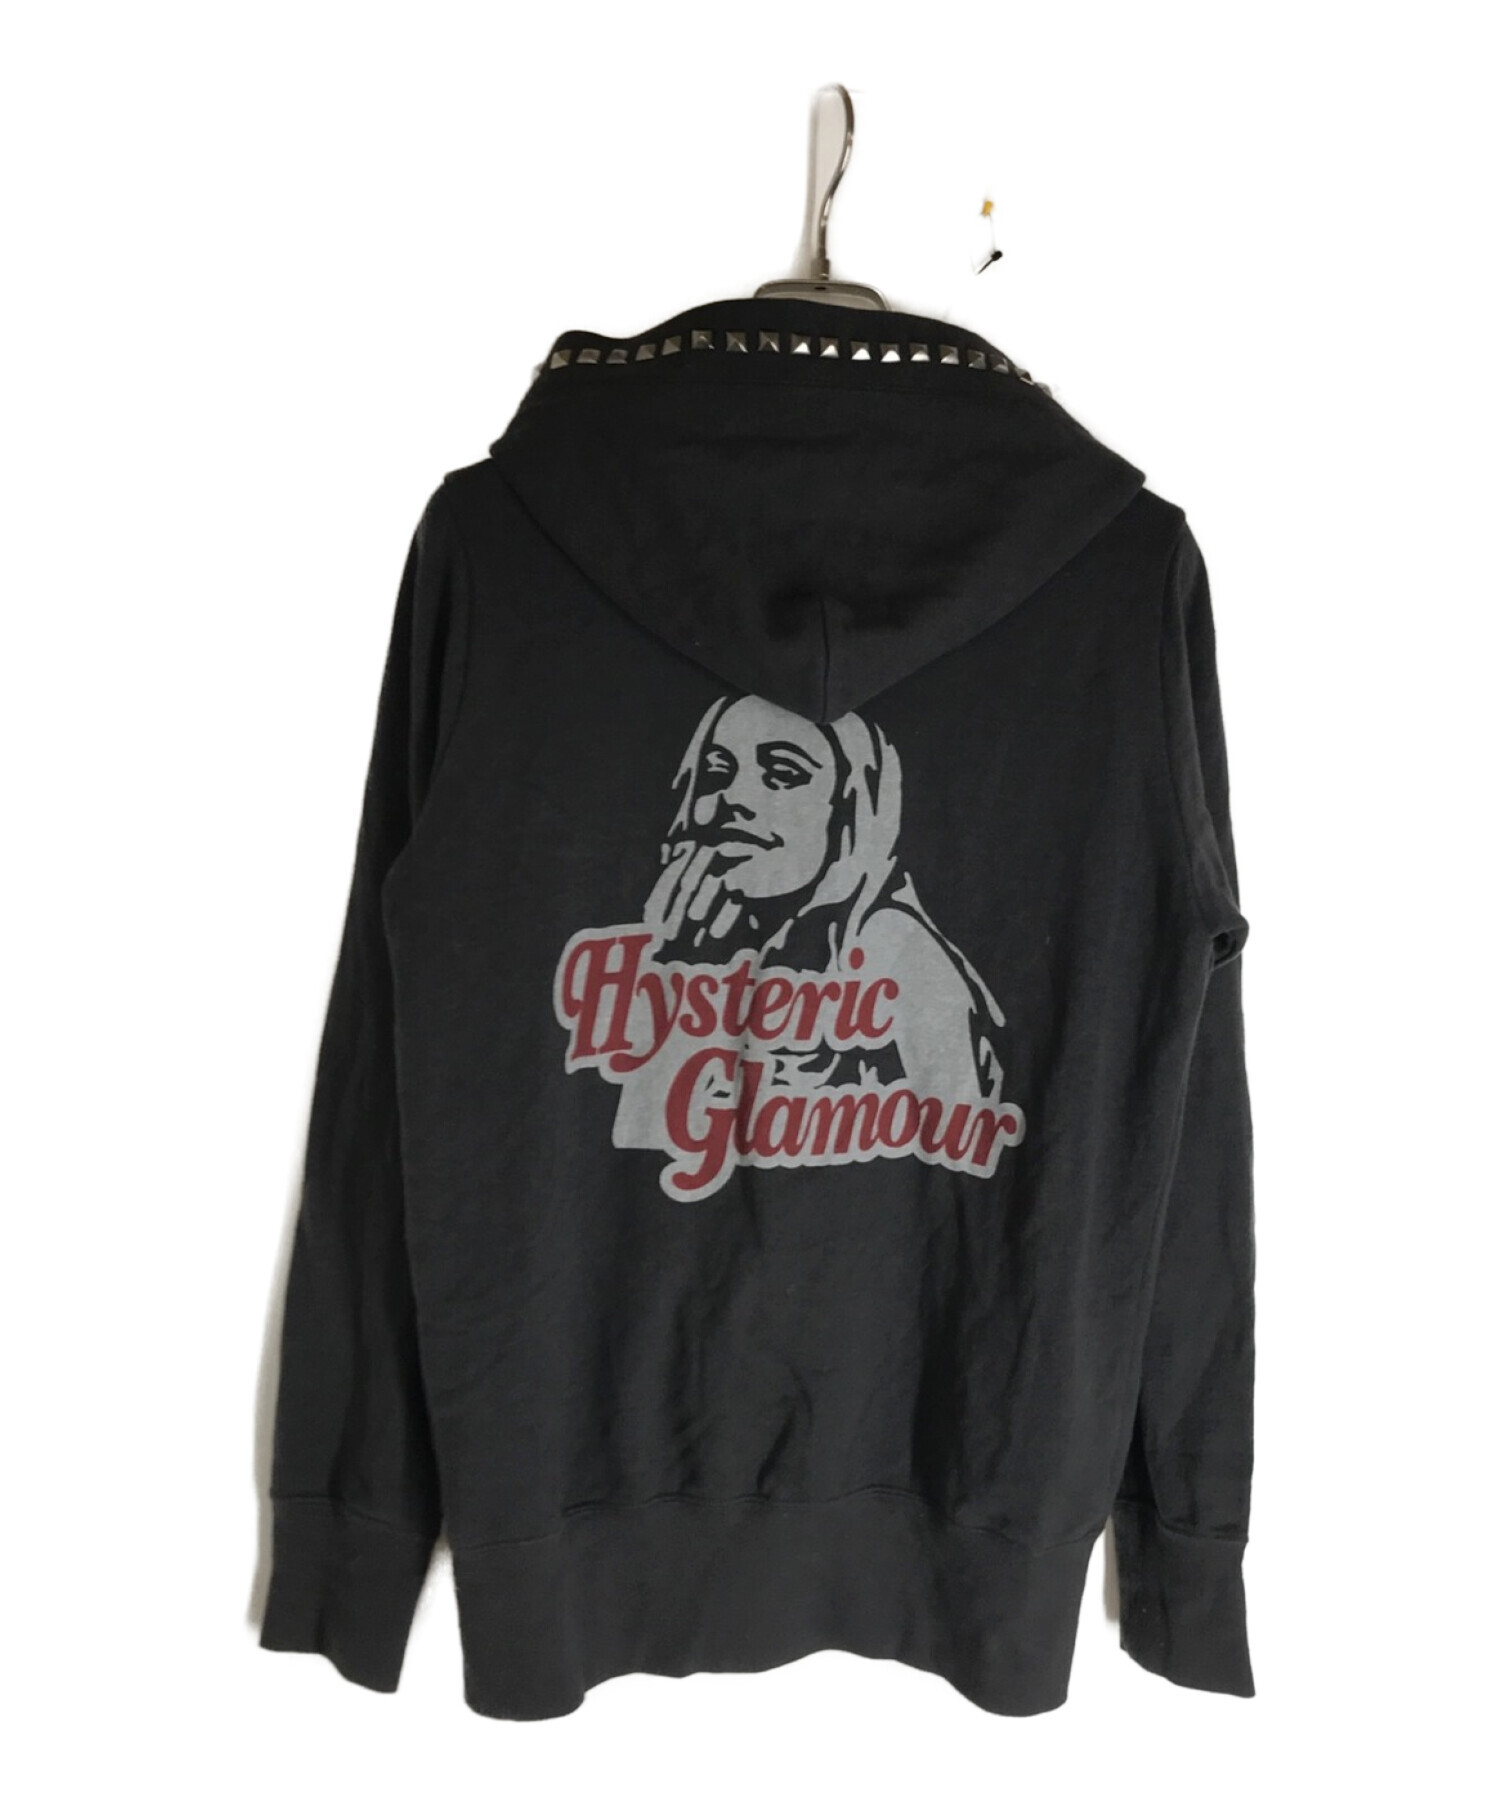 Hysteric Glamour モチーフプリントパーカー 完売品-